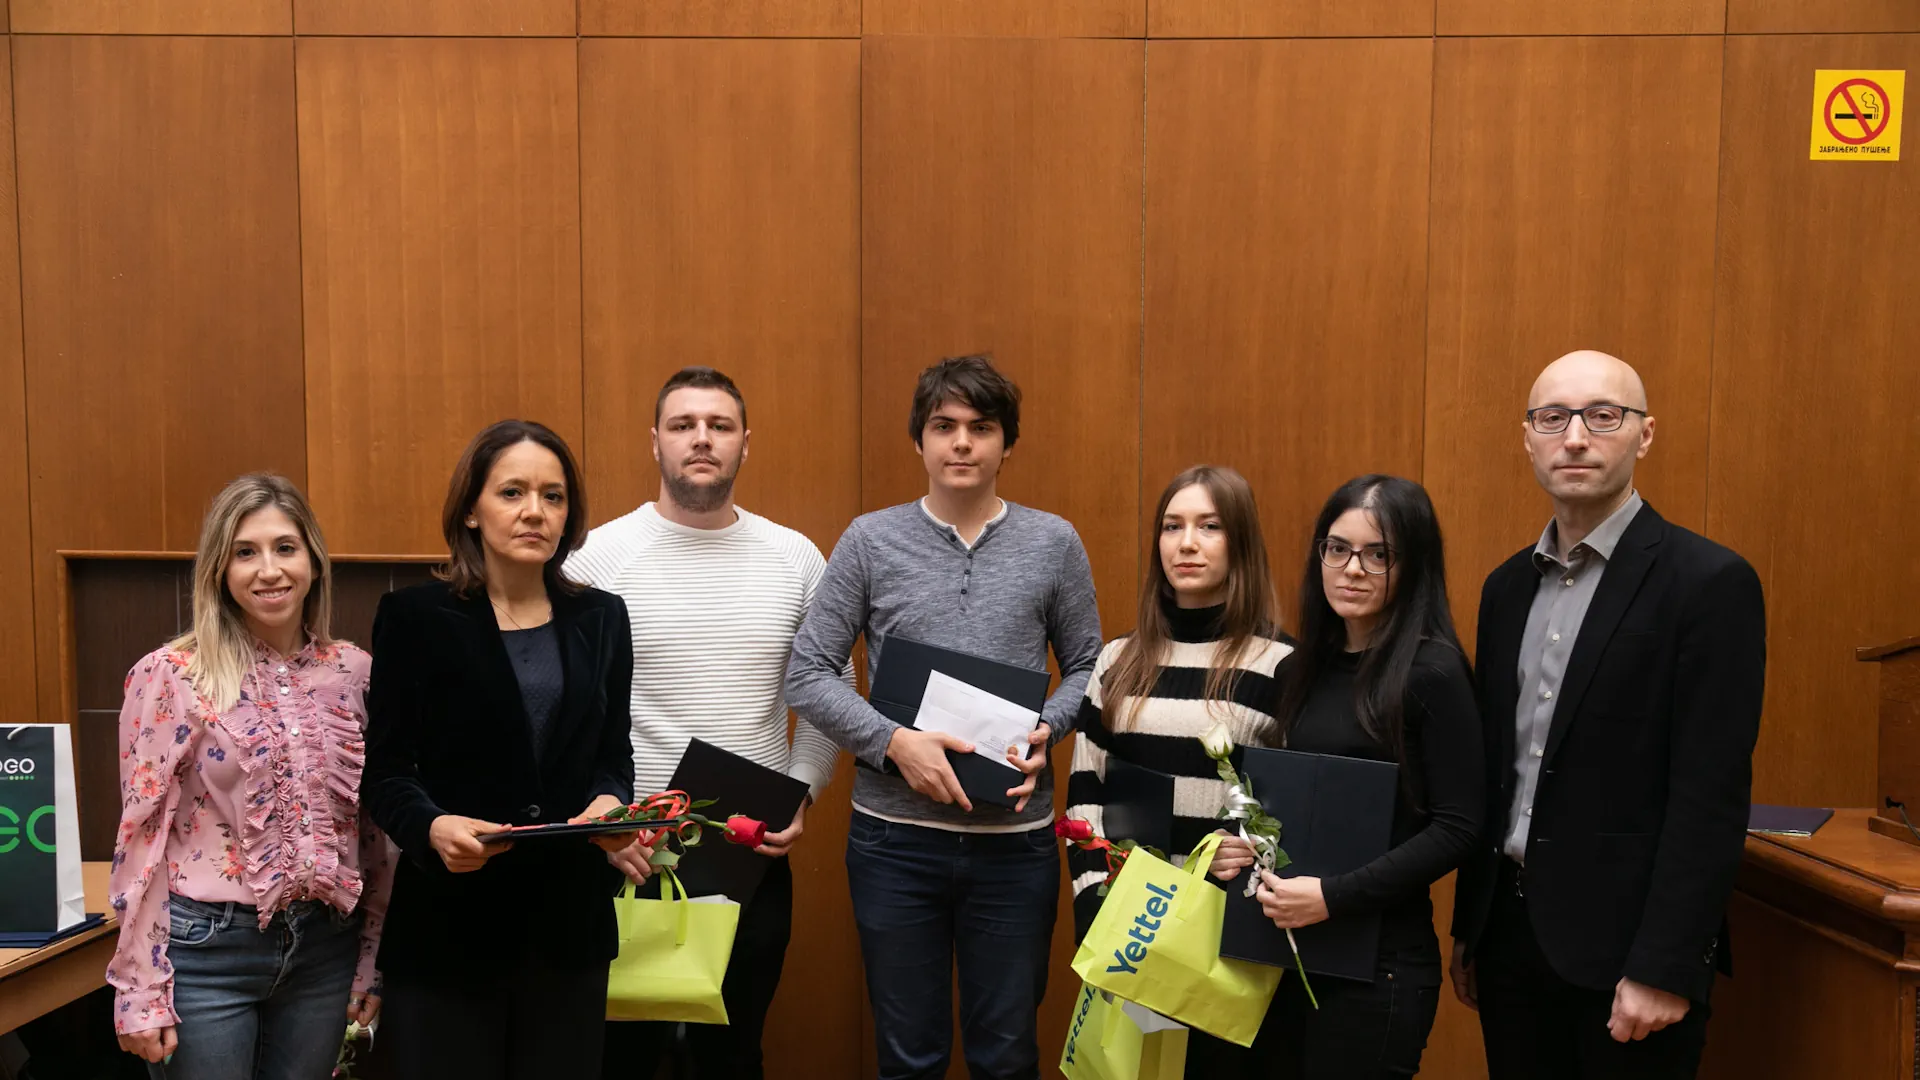 The Yettel Foundation presented the awards “Prof.  Dr. Ilija Stojanović” at the Faculty of Electrical Engineering in Belgrade